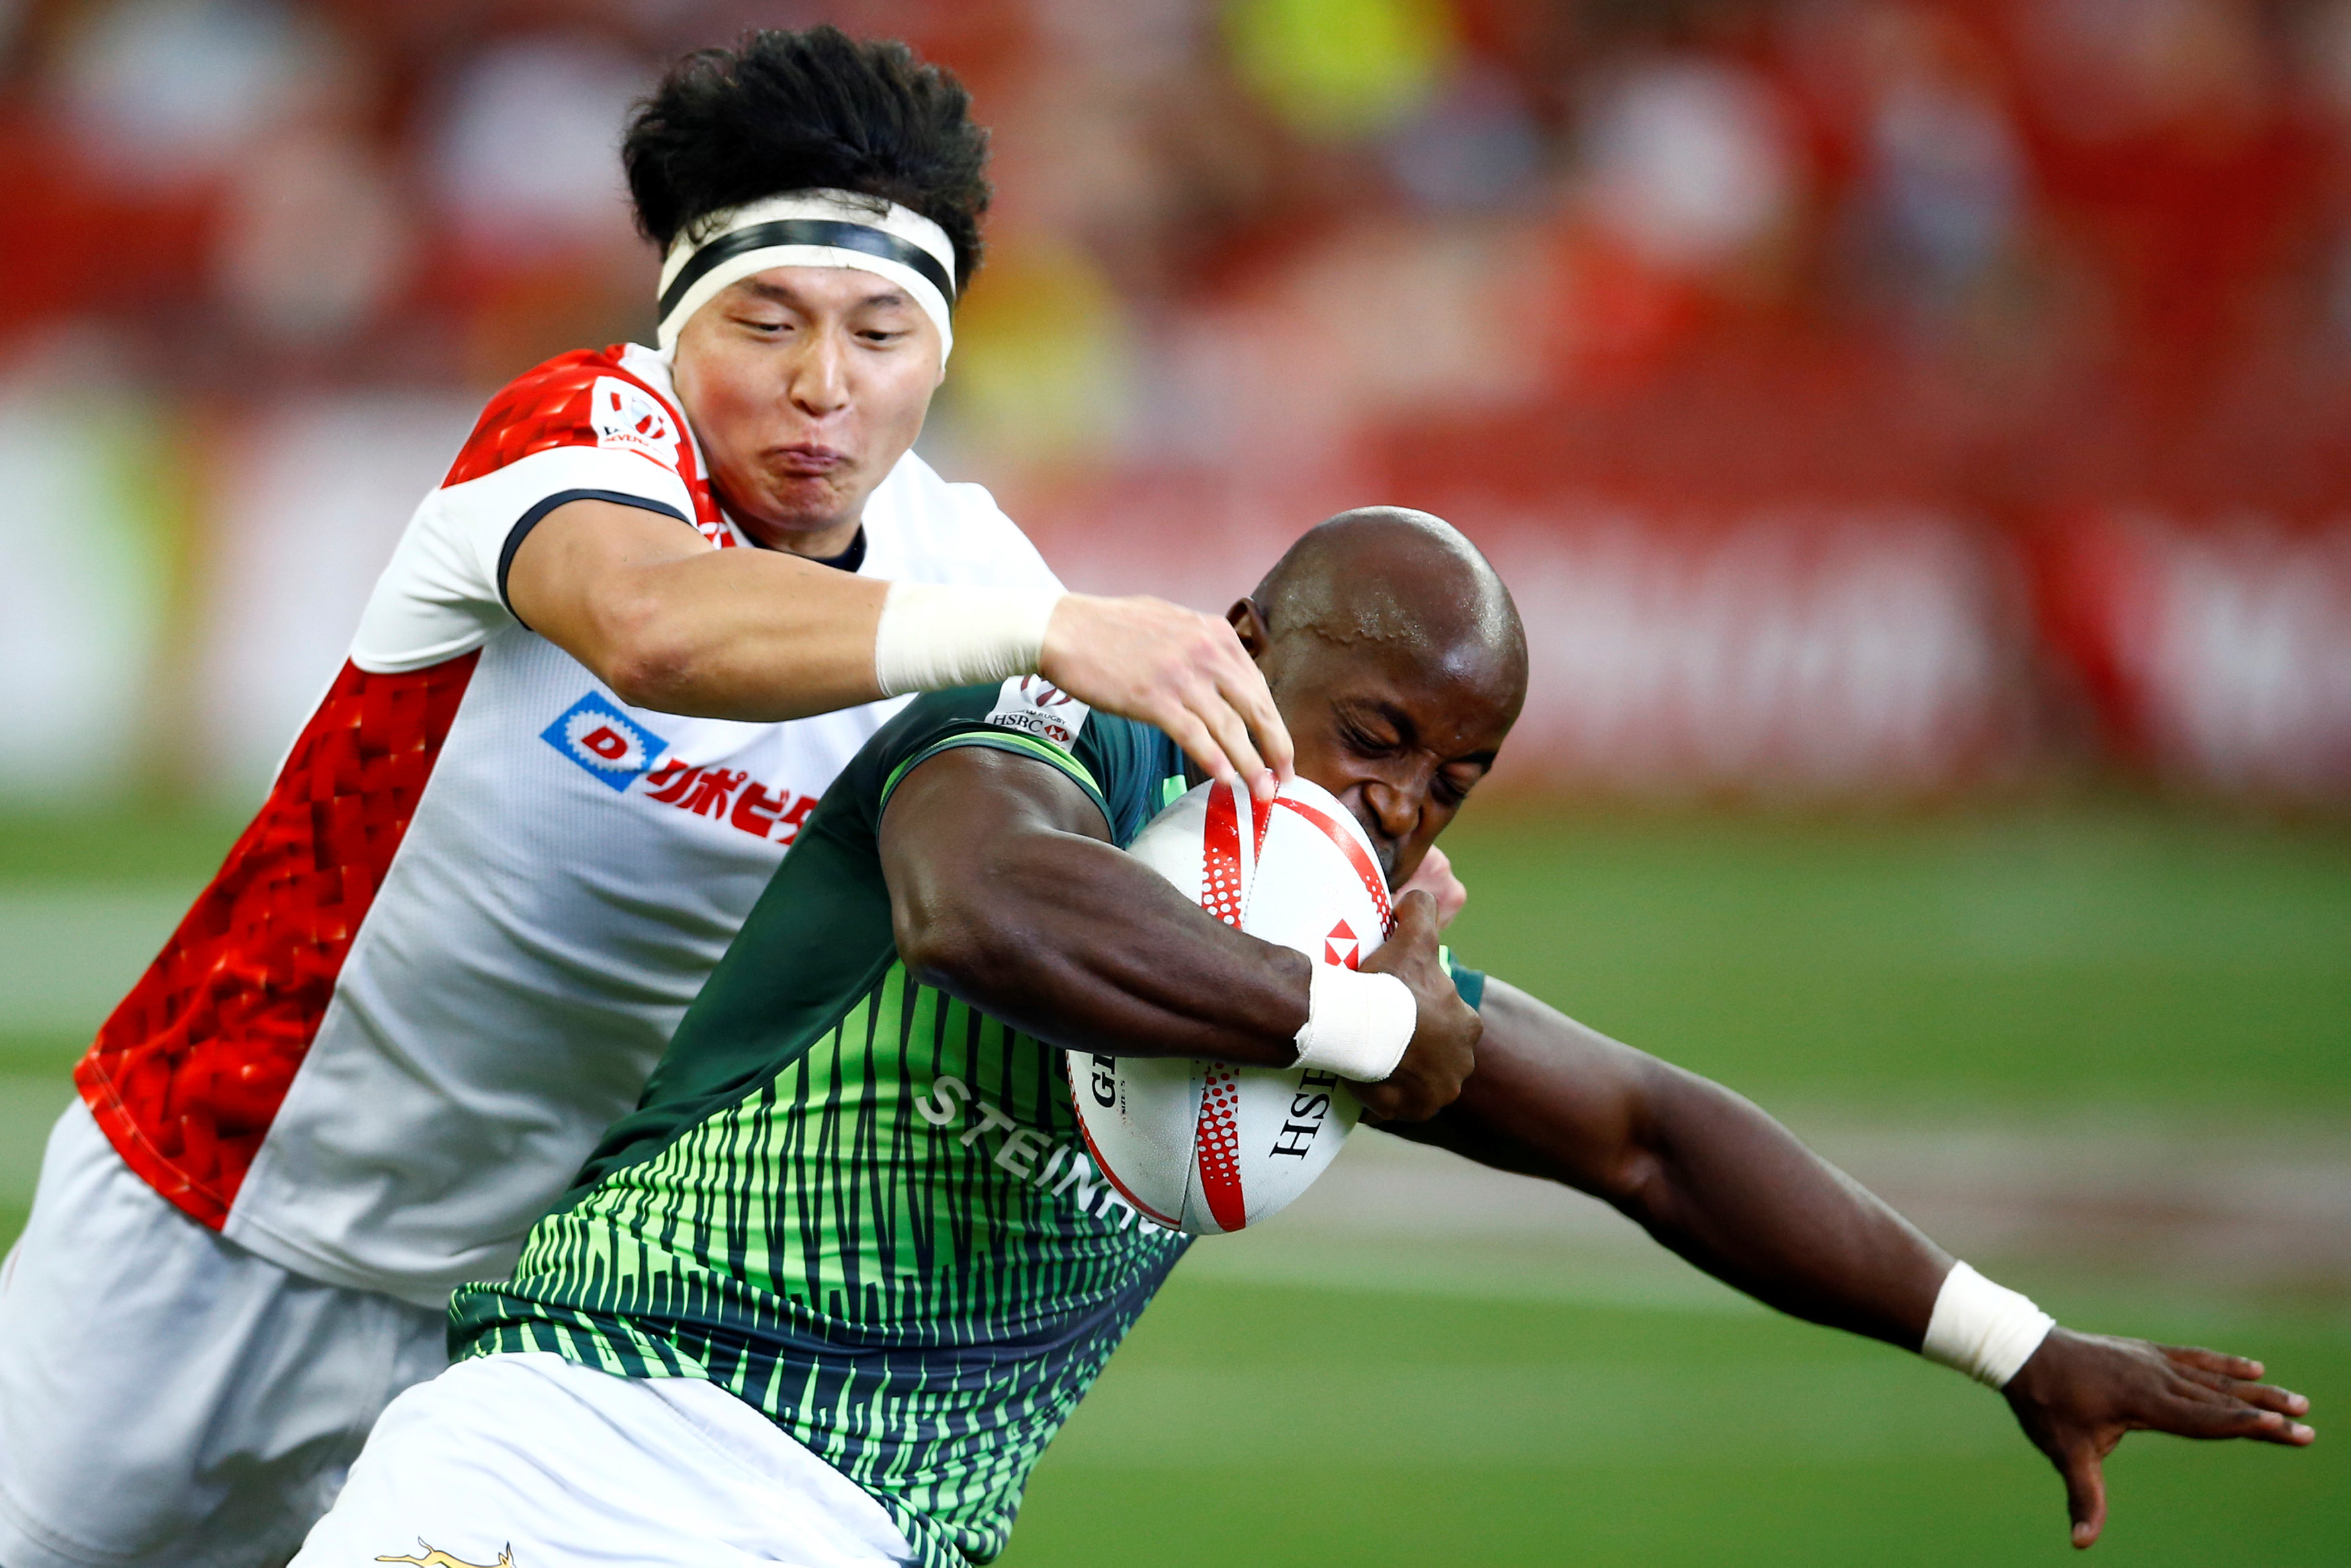 In pictures: Rugby Union Singapore Sevens